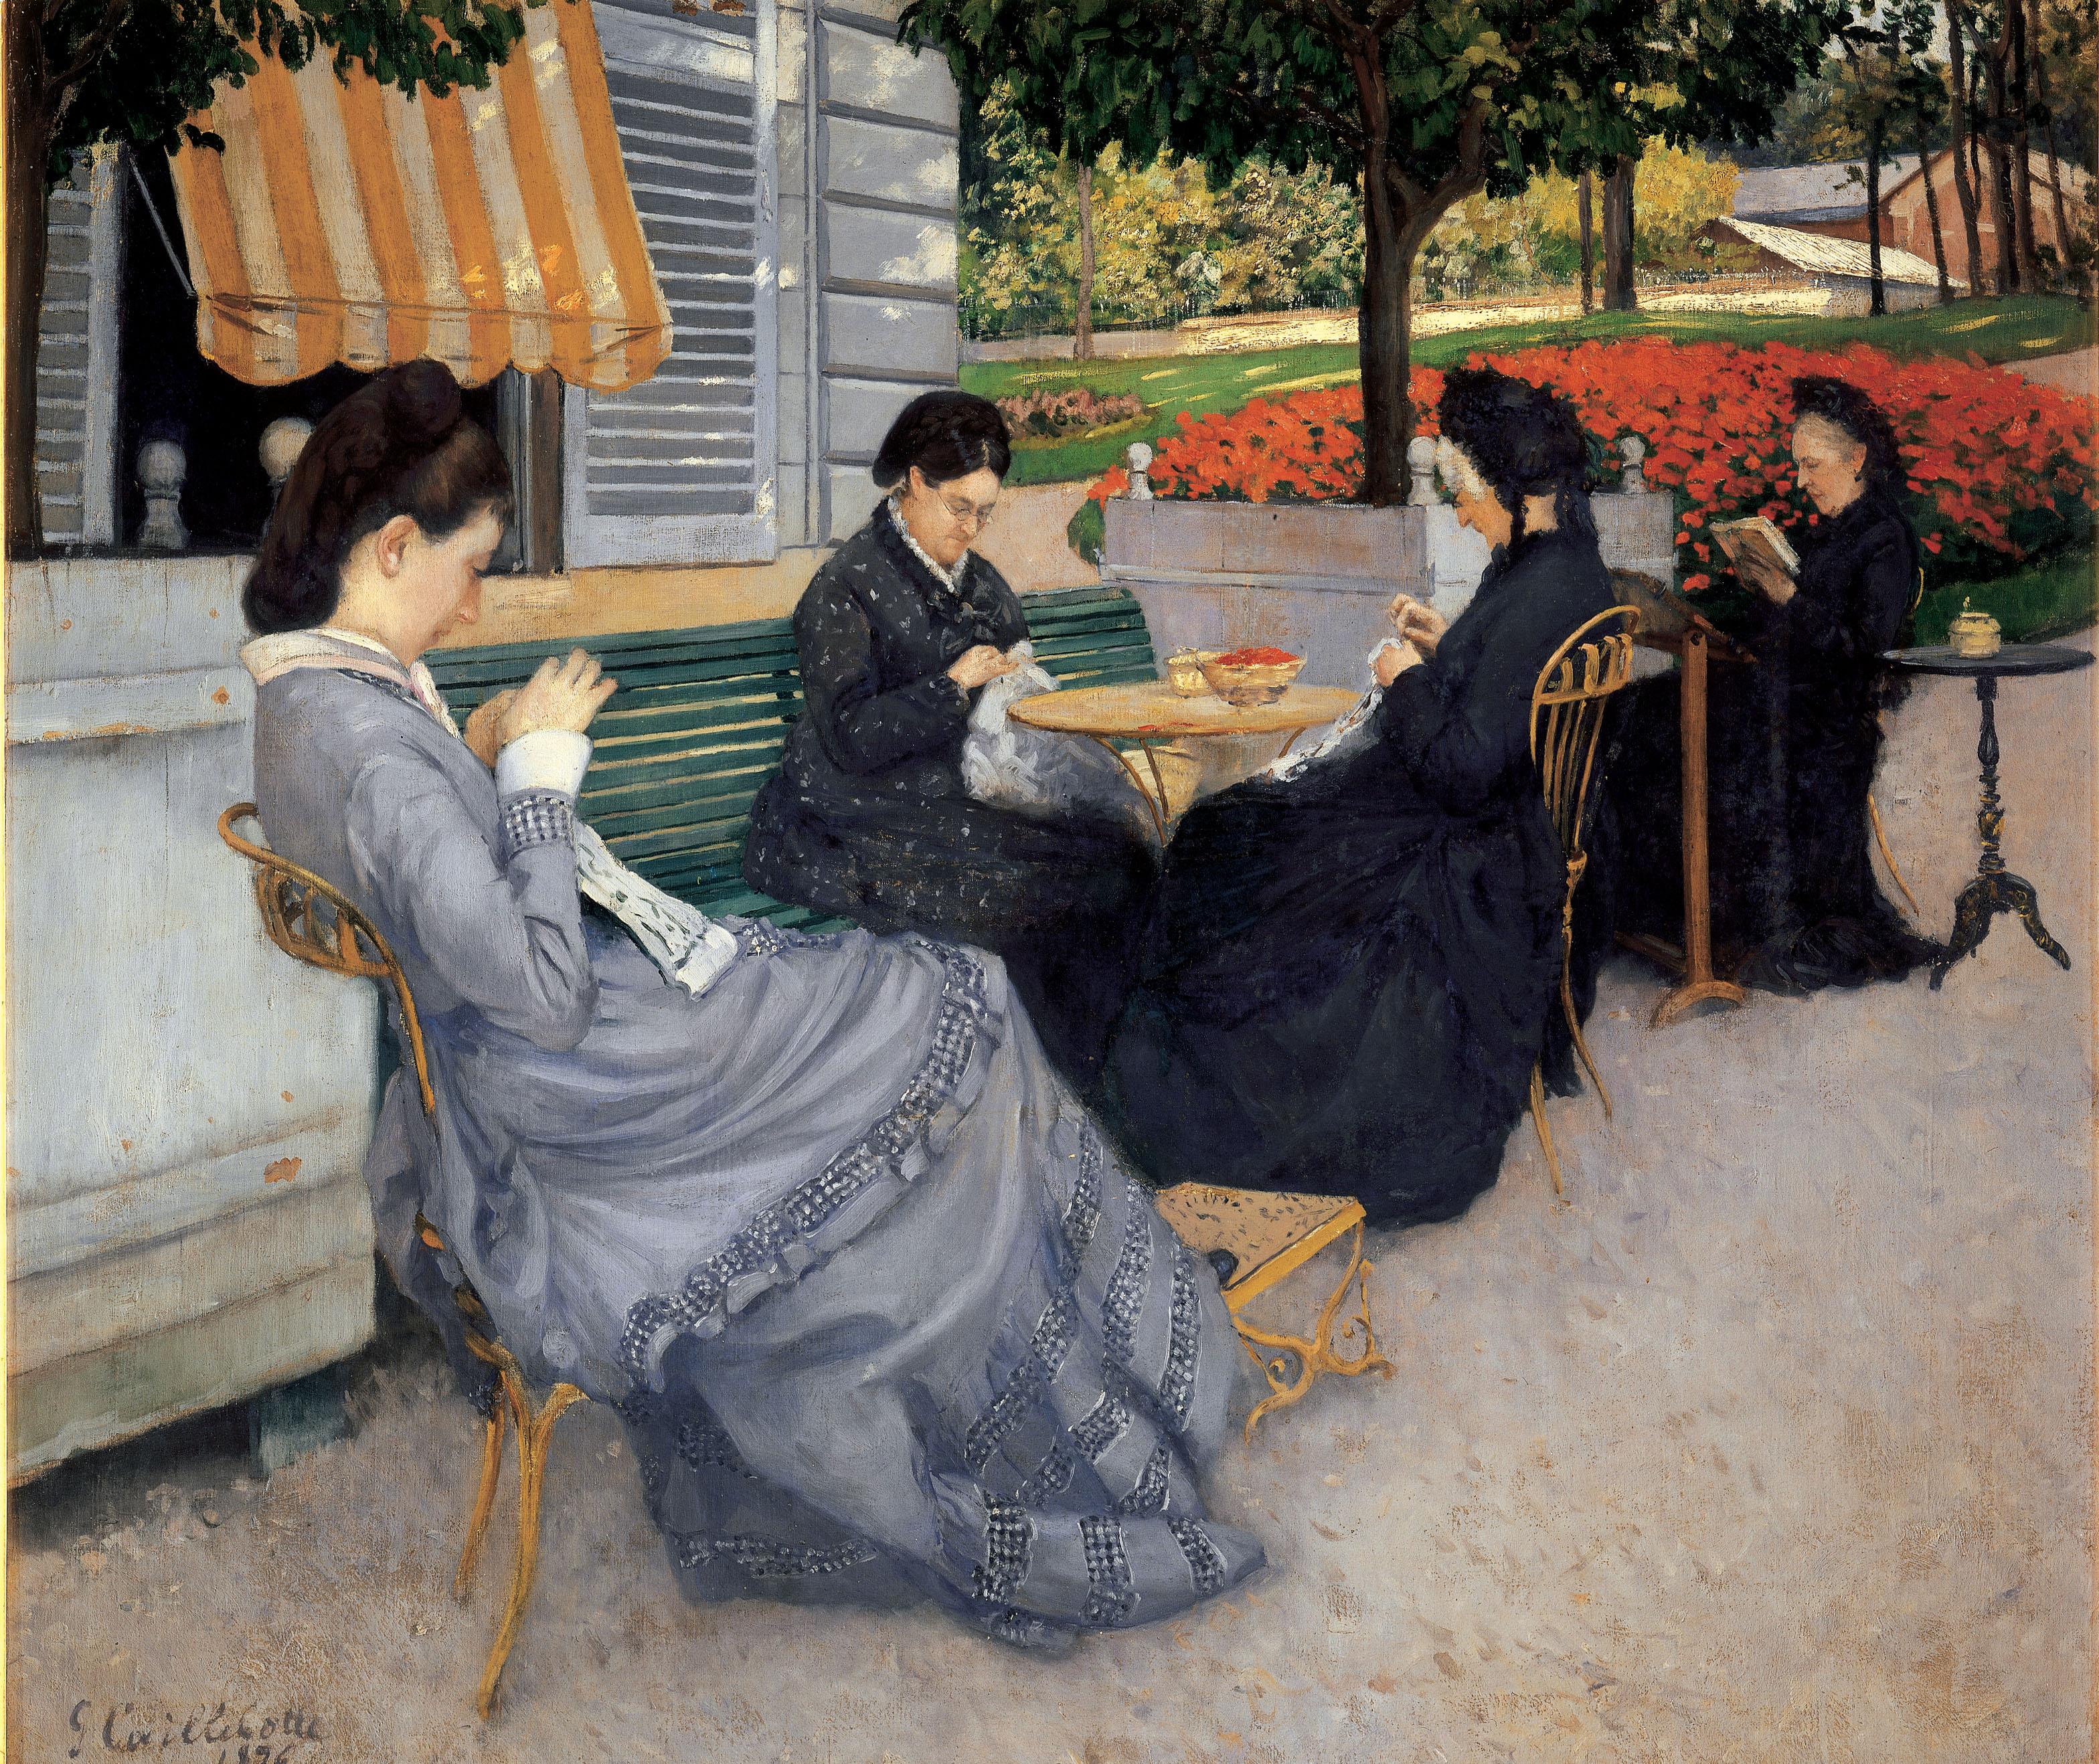 Portraits in the Countryside by Gustave Caillebotte - 1876 - 95 x 111 cm Musée Baron Gérard